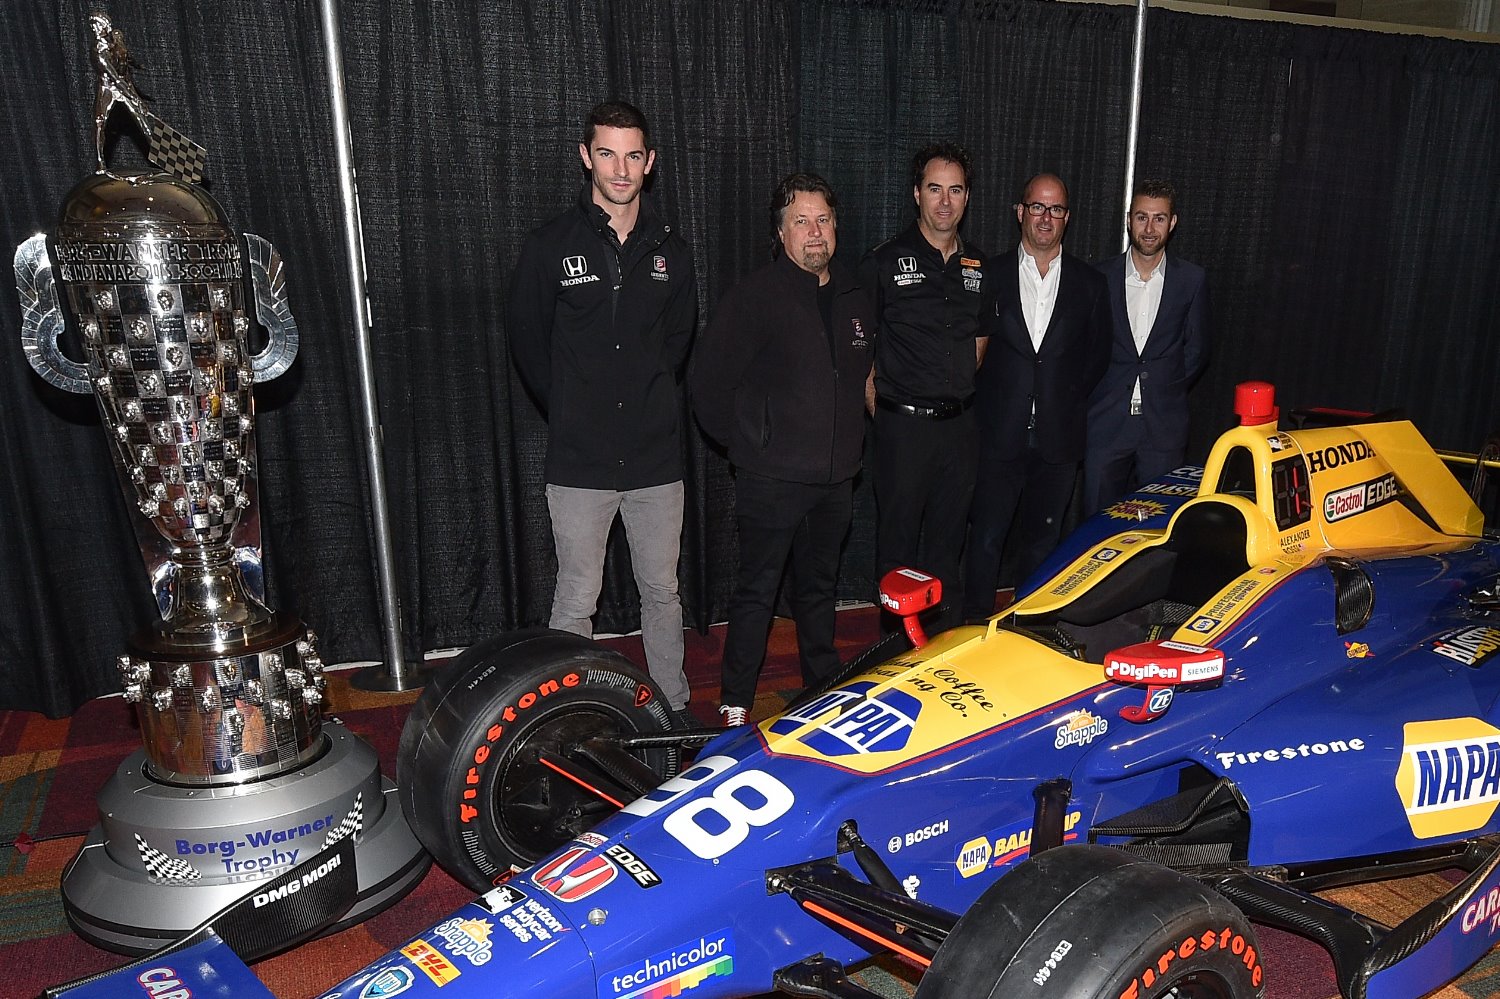 Alexander Rossi, Michael Andretti, Bryan Herta, and David Bowen donate the winning car of the 100th Indianapolis 500 to the Indianapolis Motor Speedway Museum